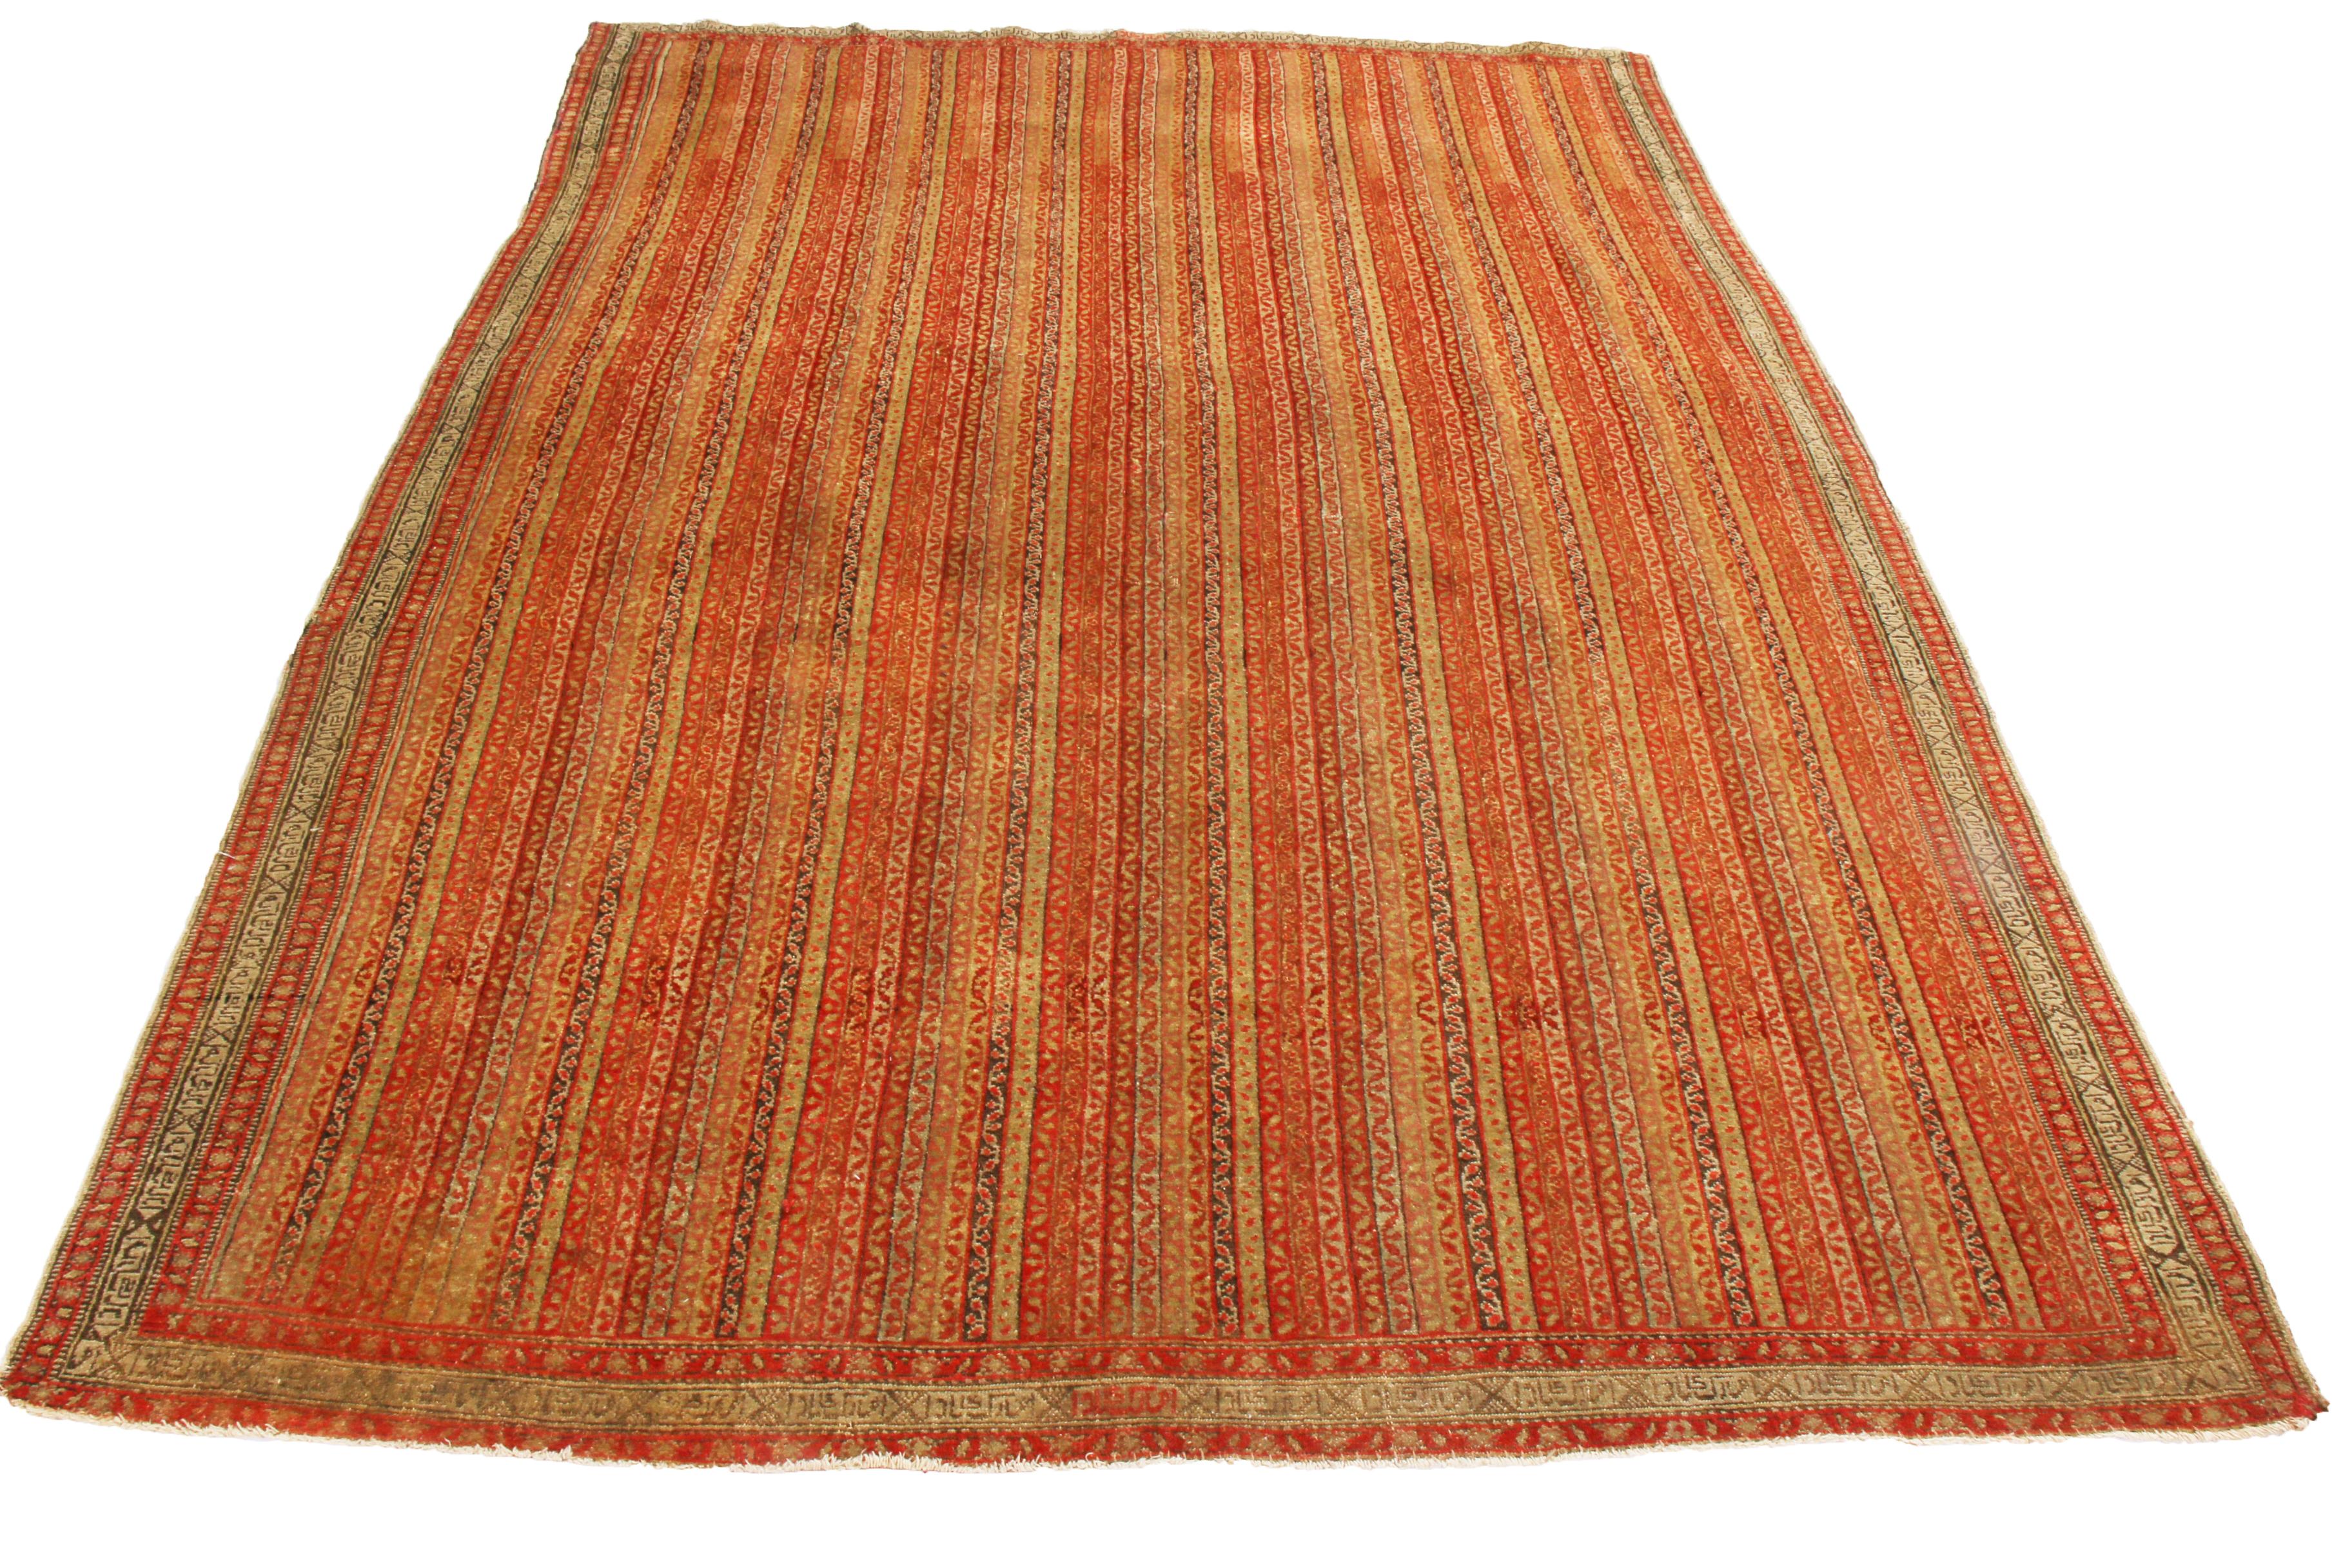 This 4x6 antique Persian Senneh rug is a very special curation of Moharamati design—hand-knotted wool circa 1880-1890. 

On the Design: 

Admirers of the craft may recognize the Moharamati, as seen in the vertical stripes in red, gold and brown.